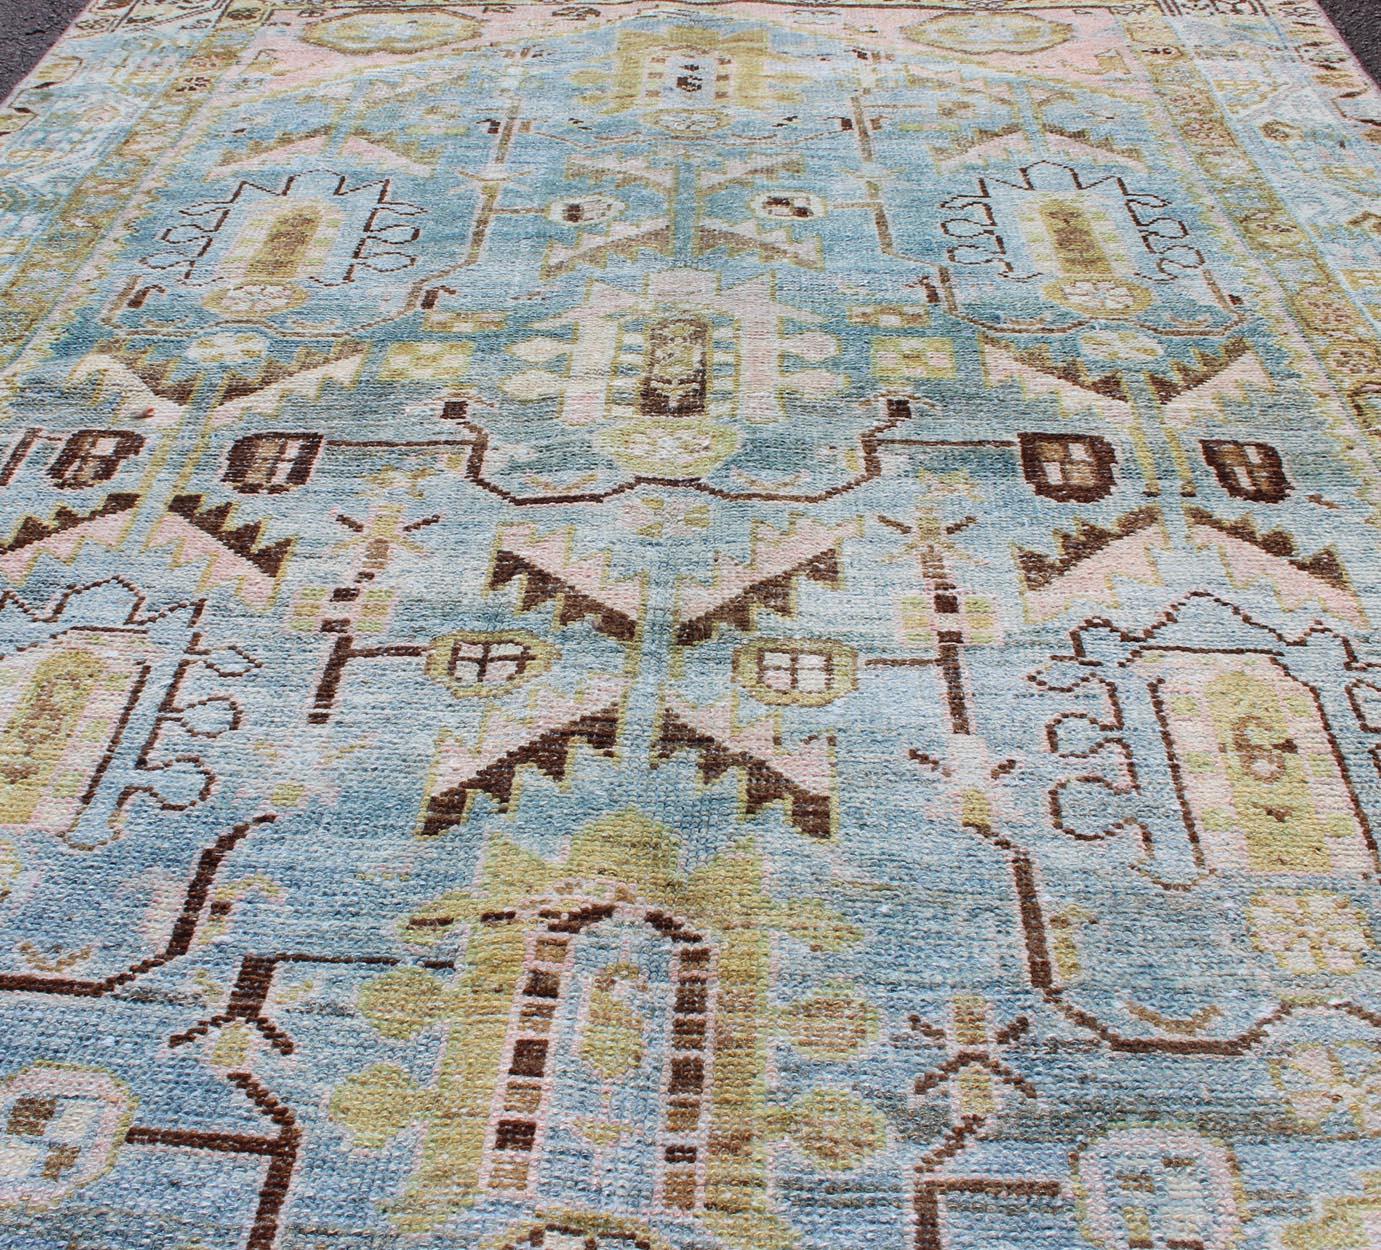 Antique Geometric Design Persian Malayer Rug in Light Blue, Pink, and Green In Good Condition For Sale In Atlanta, GA